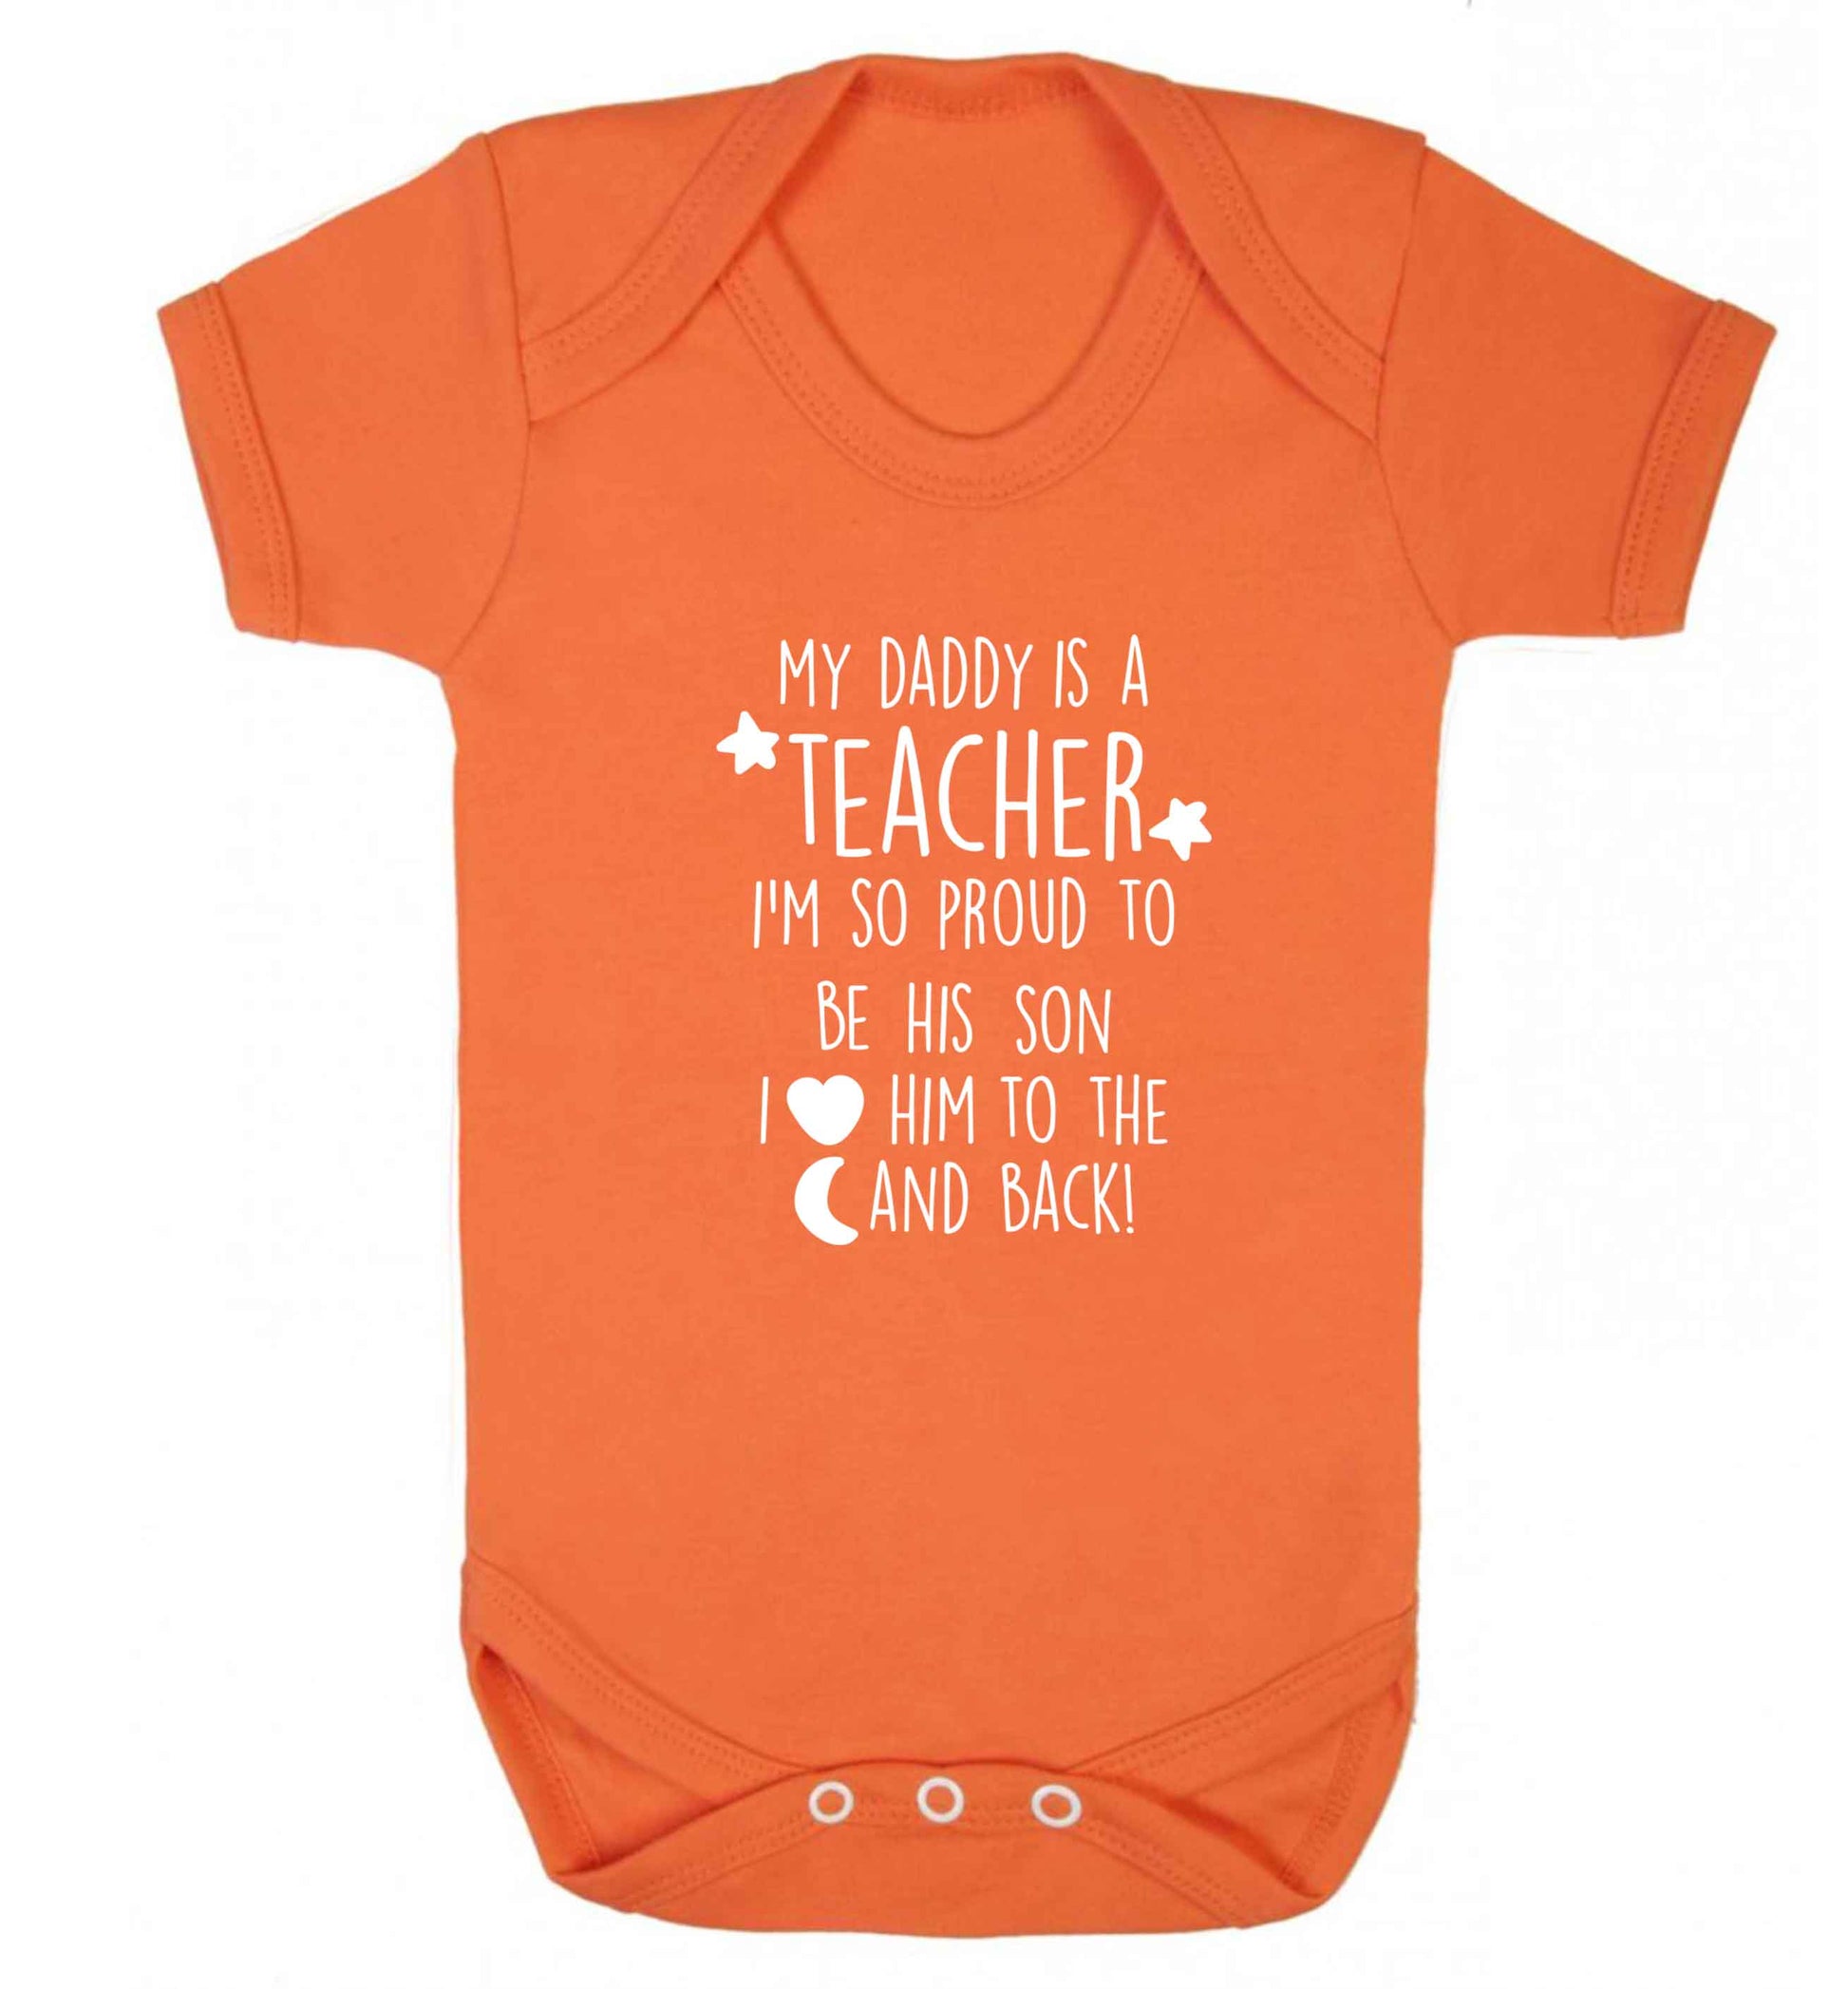 My daddy is a teacher I'm so proud to be his son I love her to the moon and back baby vest orange 18-24 months